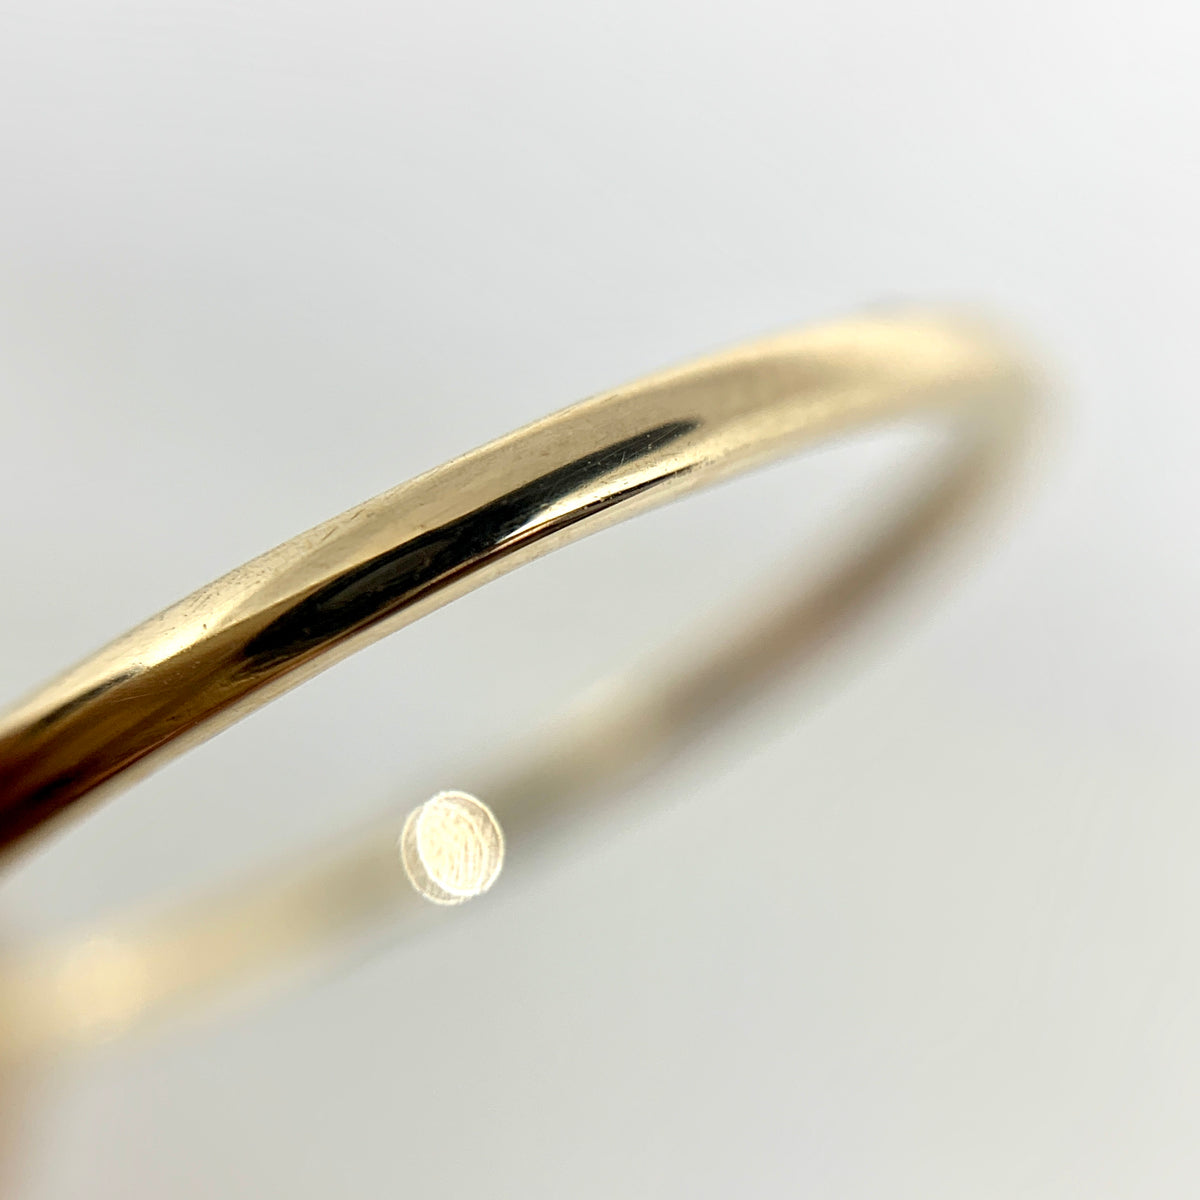 14K Yellow Gold 1.5mm Plain Stackable Wedding Band